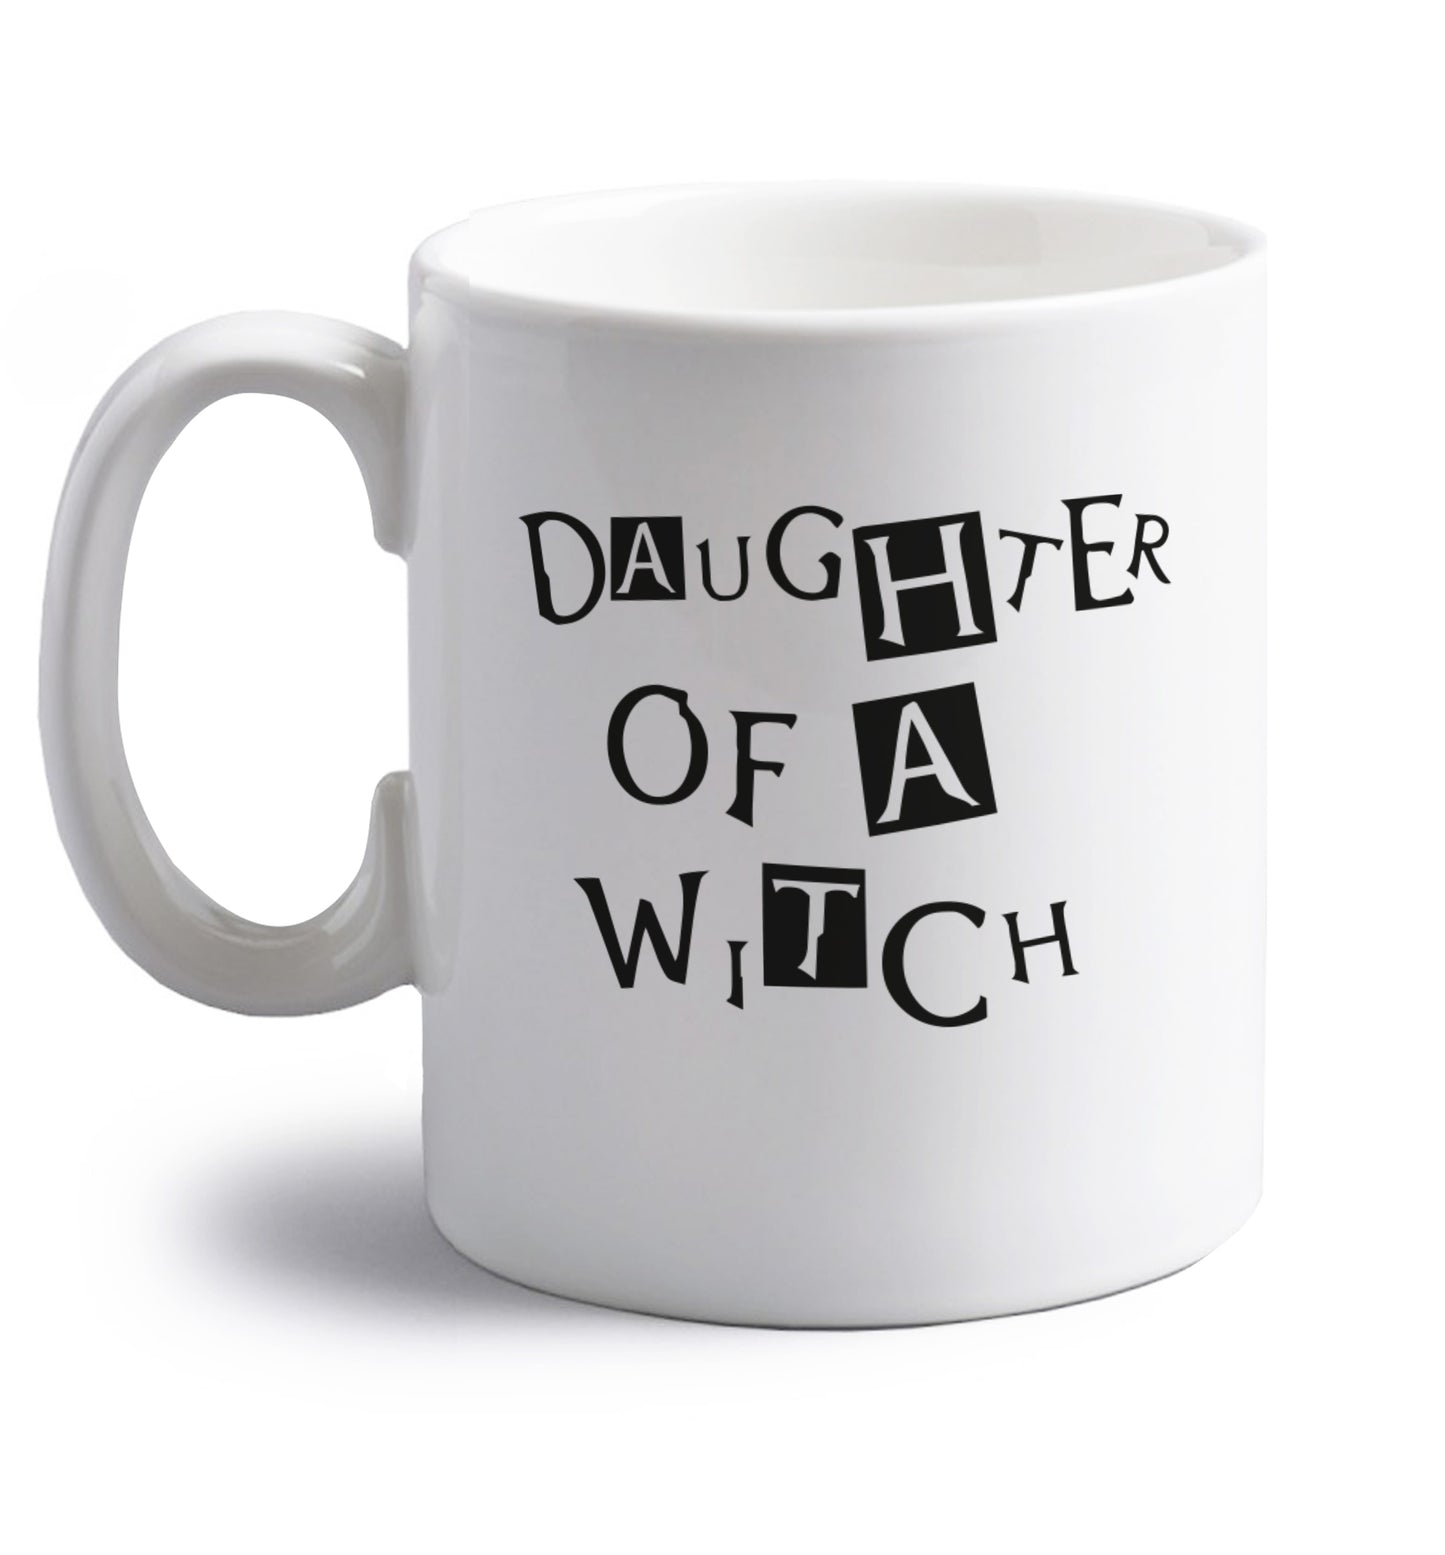 Daughter of a witch right handed white ceramic mug 